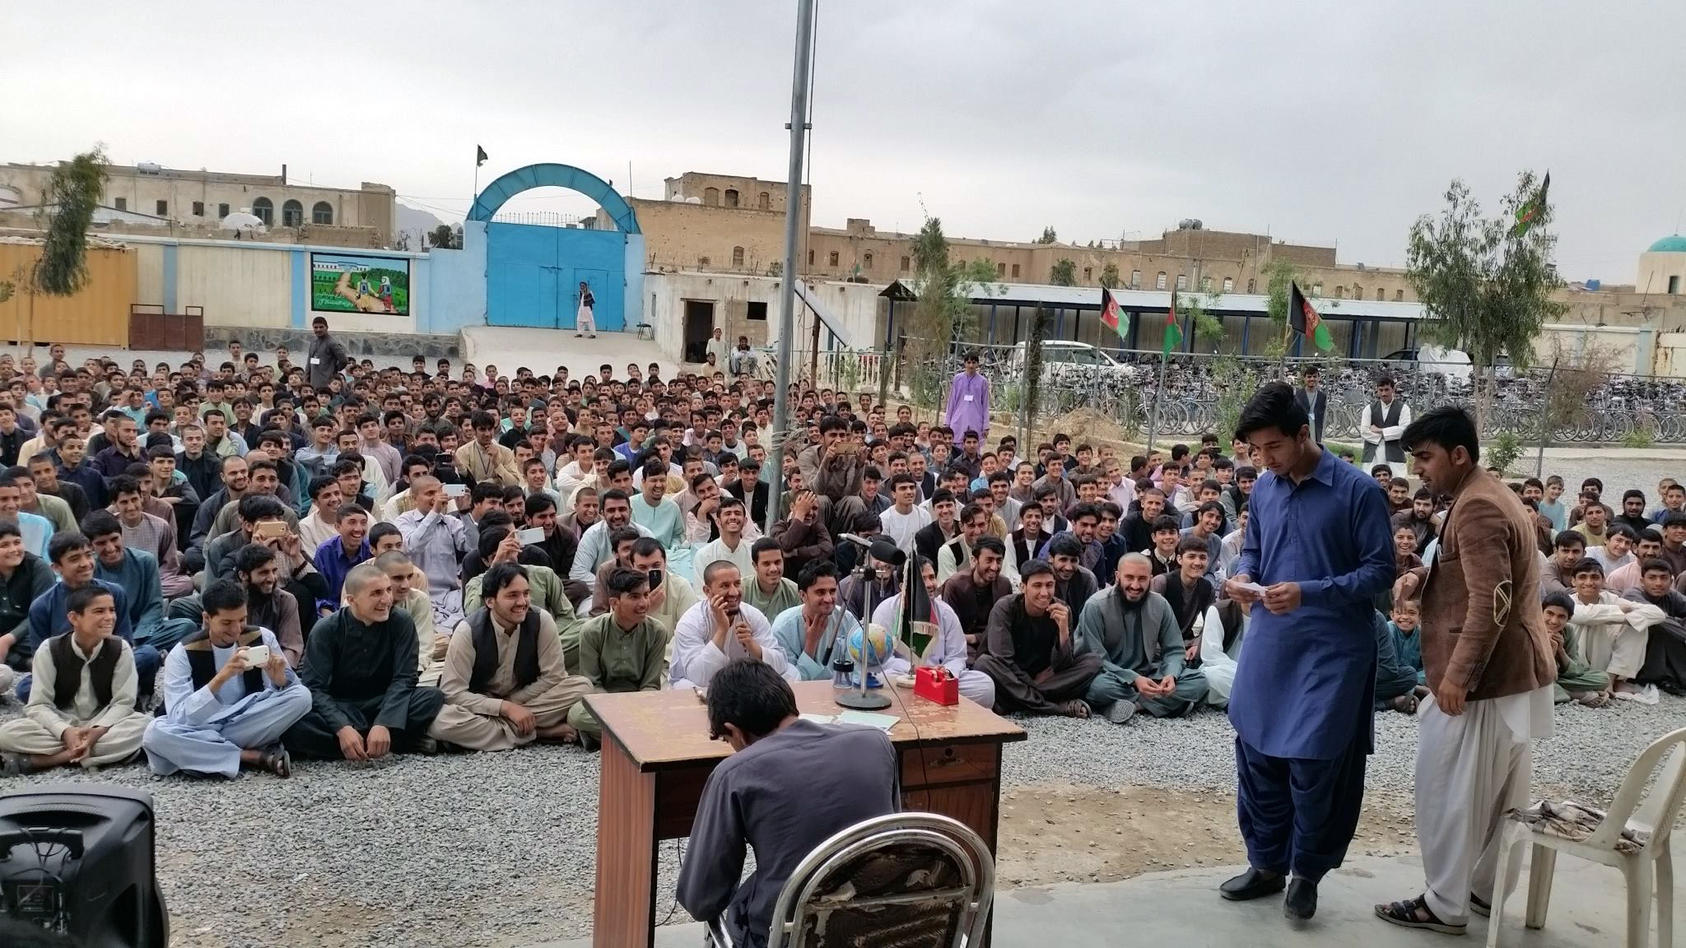 A crowd in Afghanistan’s second-largest city, Kandahar, laughs during a performance by a local youth group that dramatized corruption by Afghan officials. (Photo: Bond Street Theater)